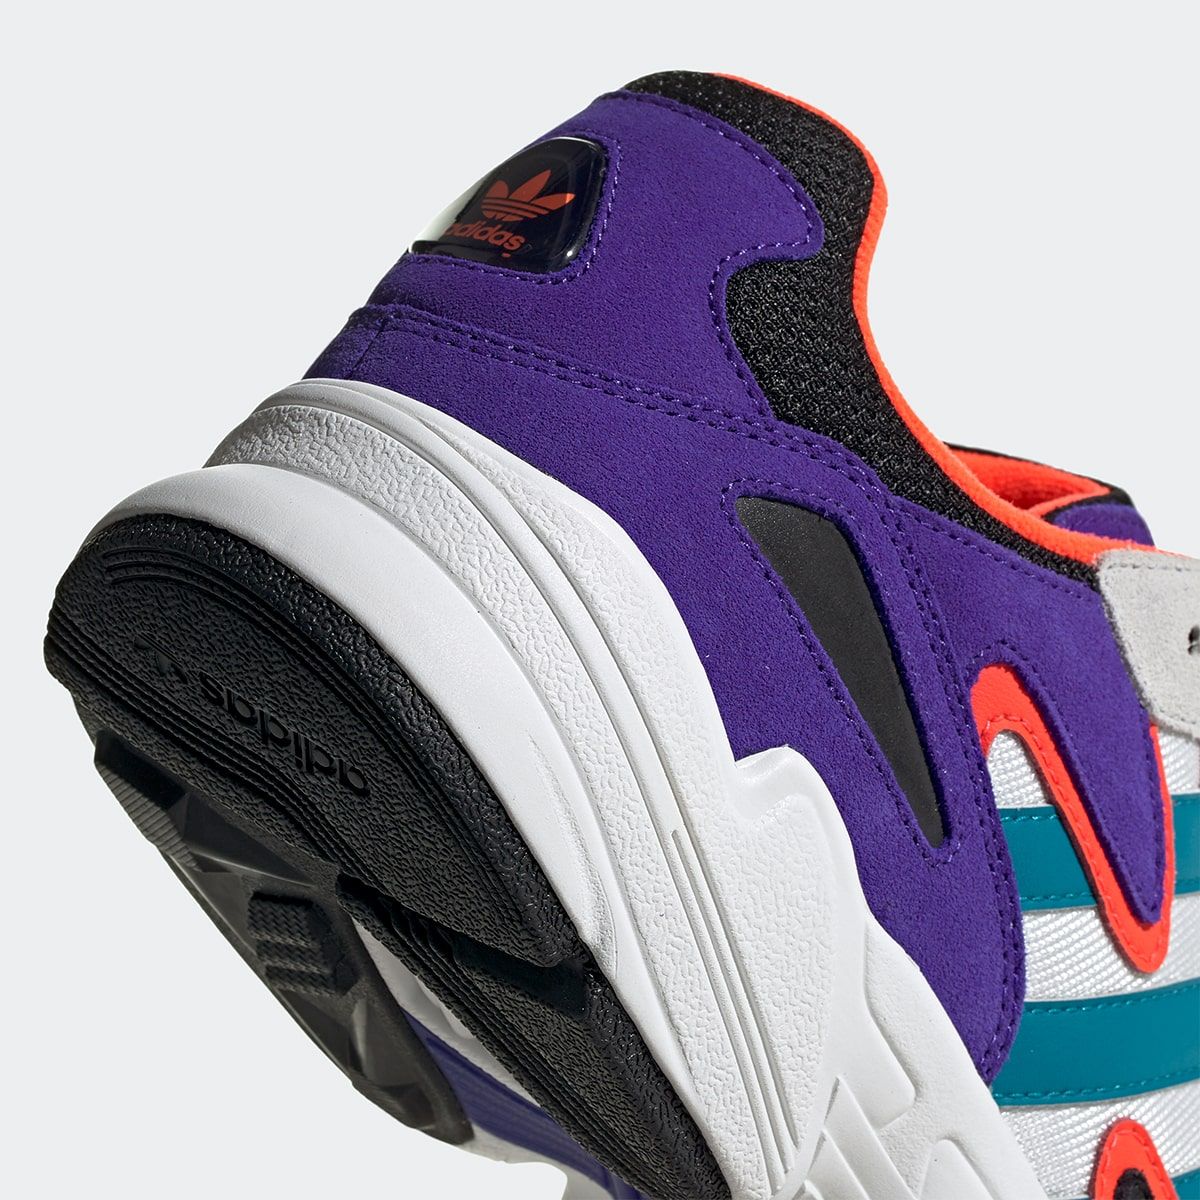 Available Now // adidas Yung-96 Chasm Turns Up in an Ultra-90s "Active